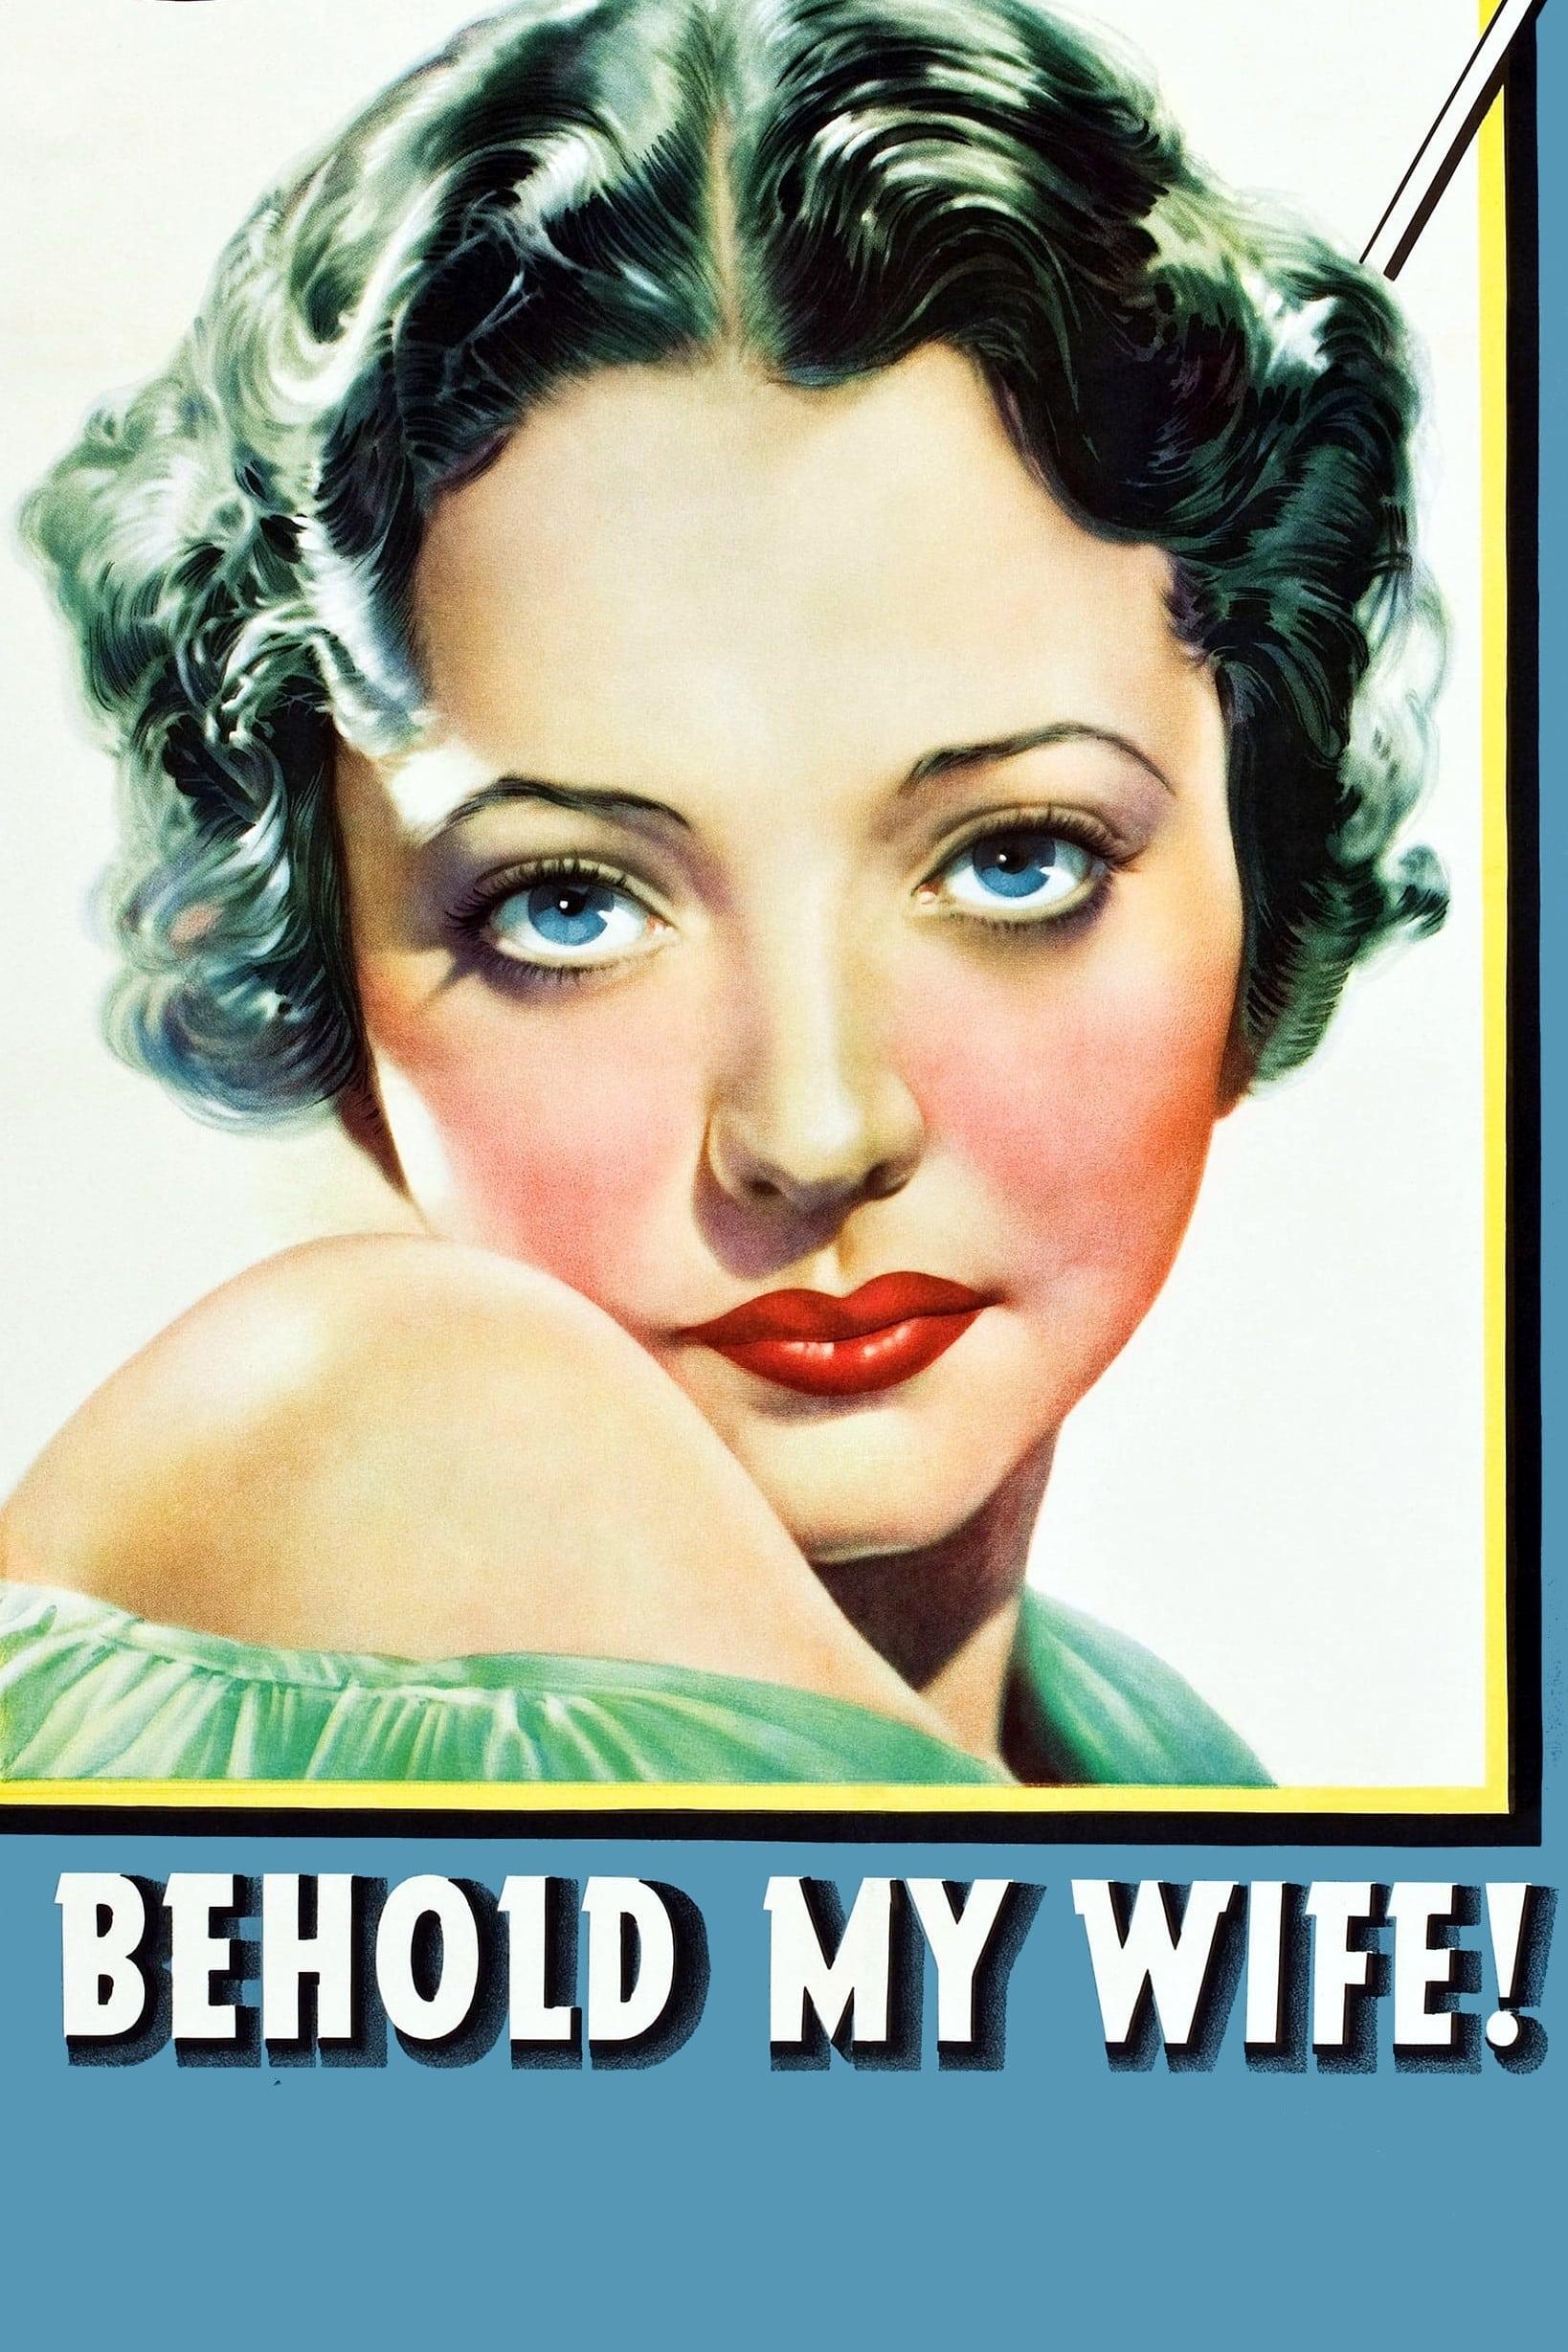 Behold My Wife! poster